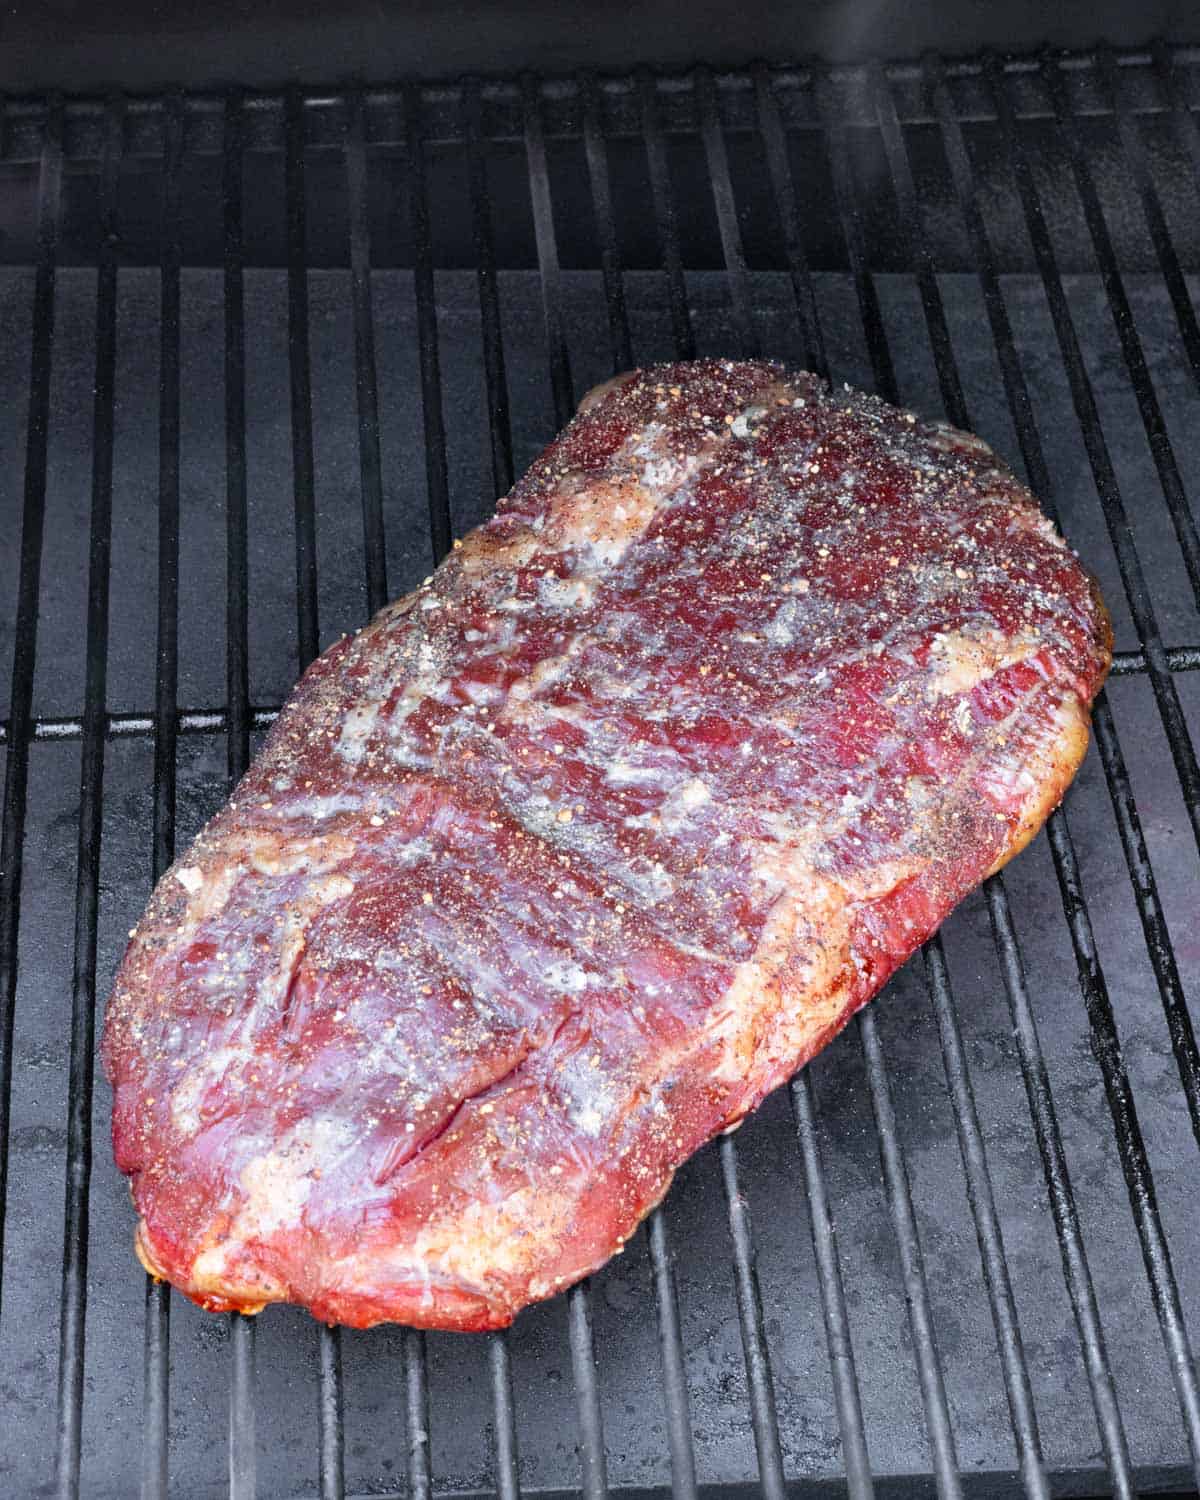 Smoked steak, back on the grill to reverse sear.